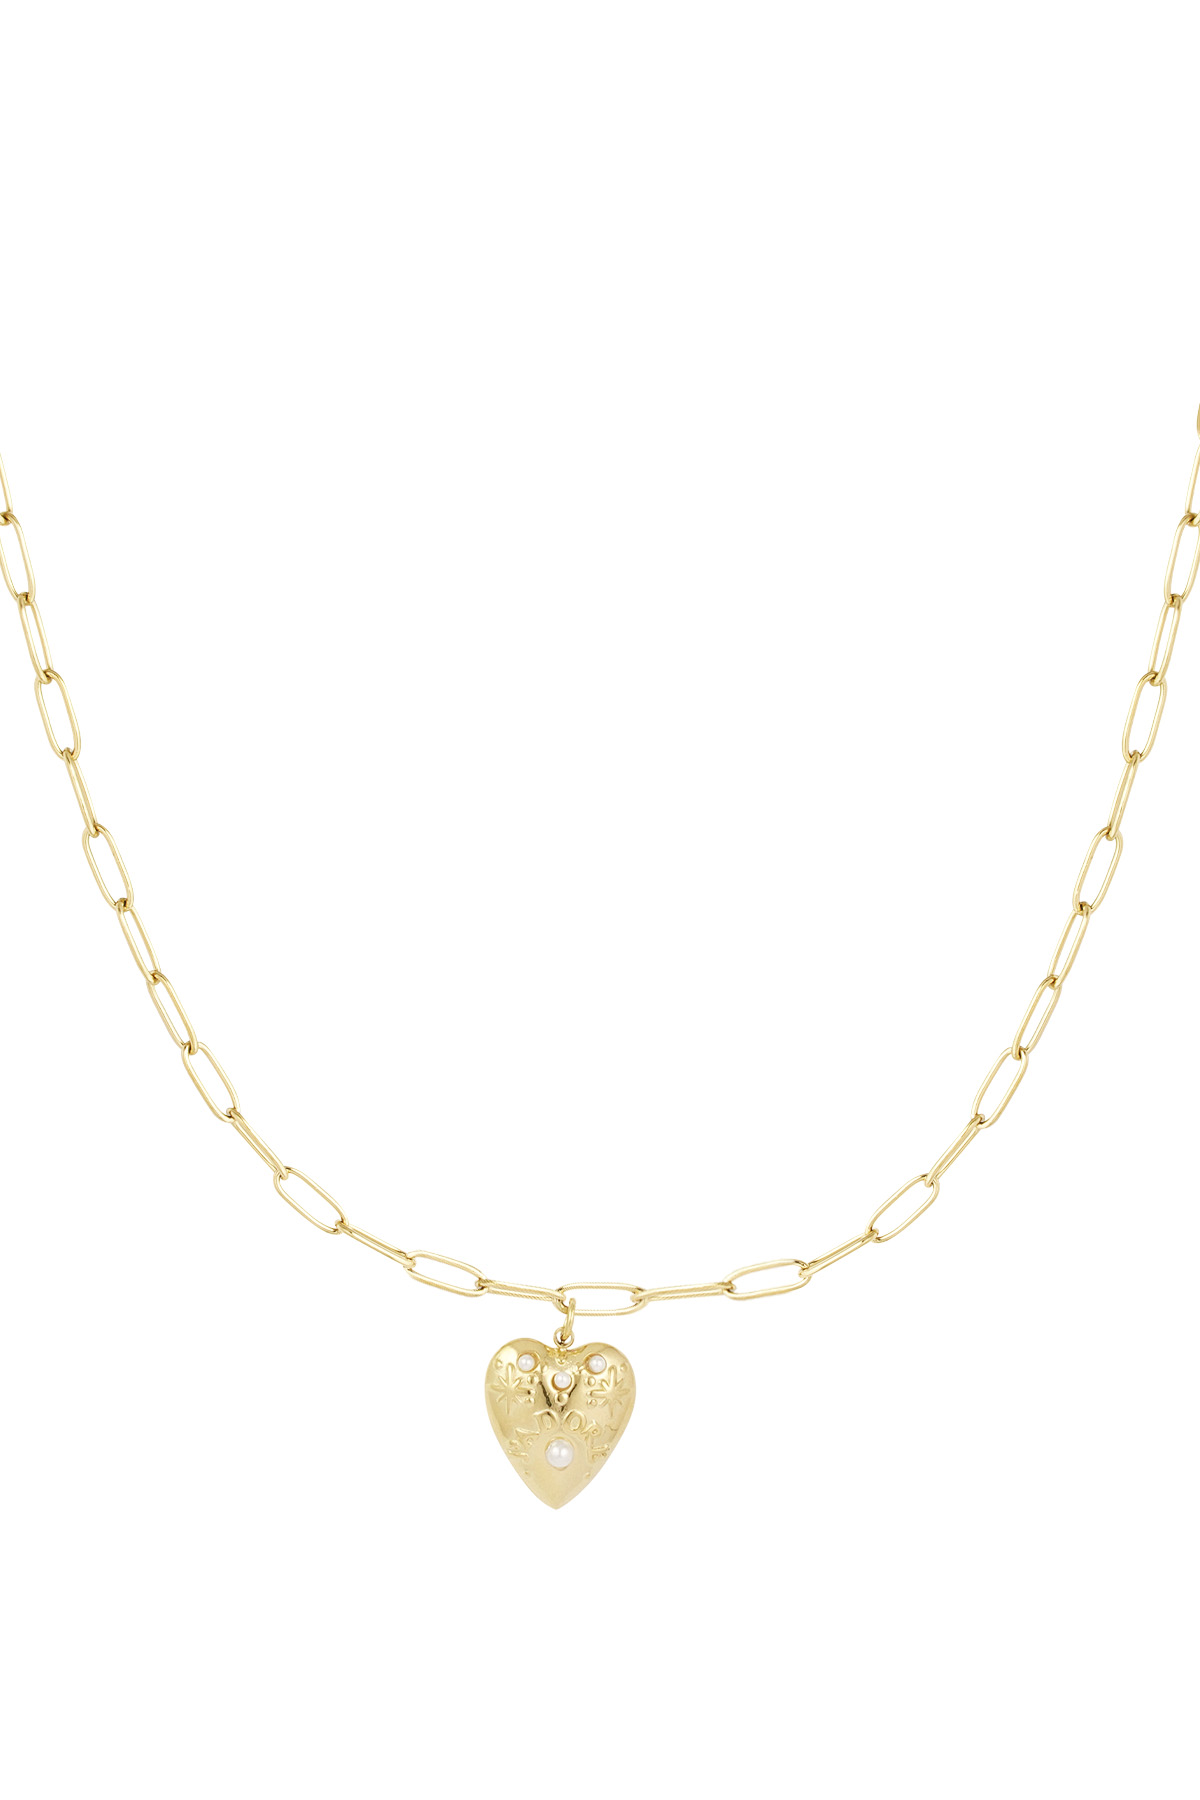 Necklace heart of gold - gold